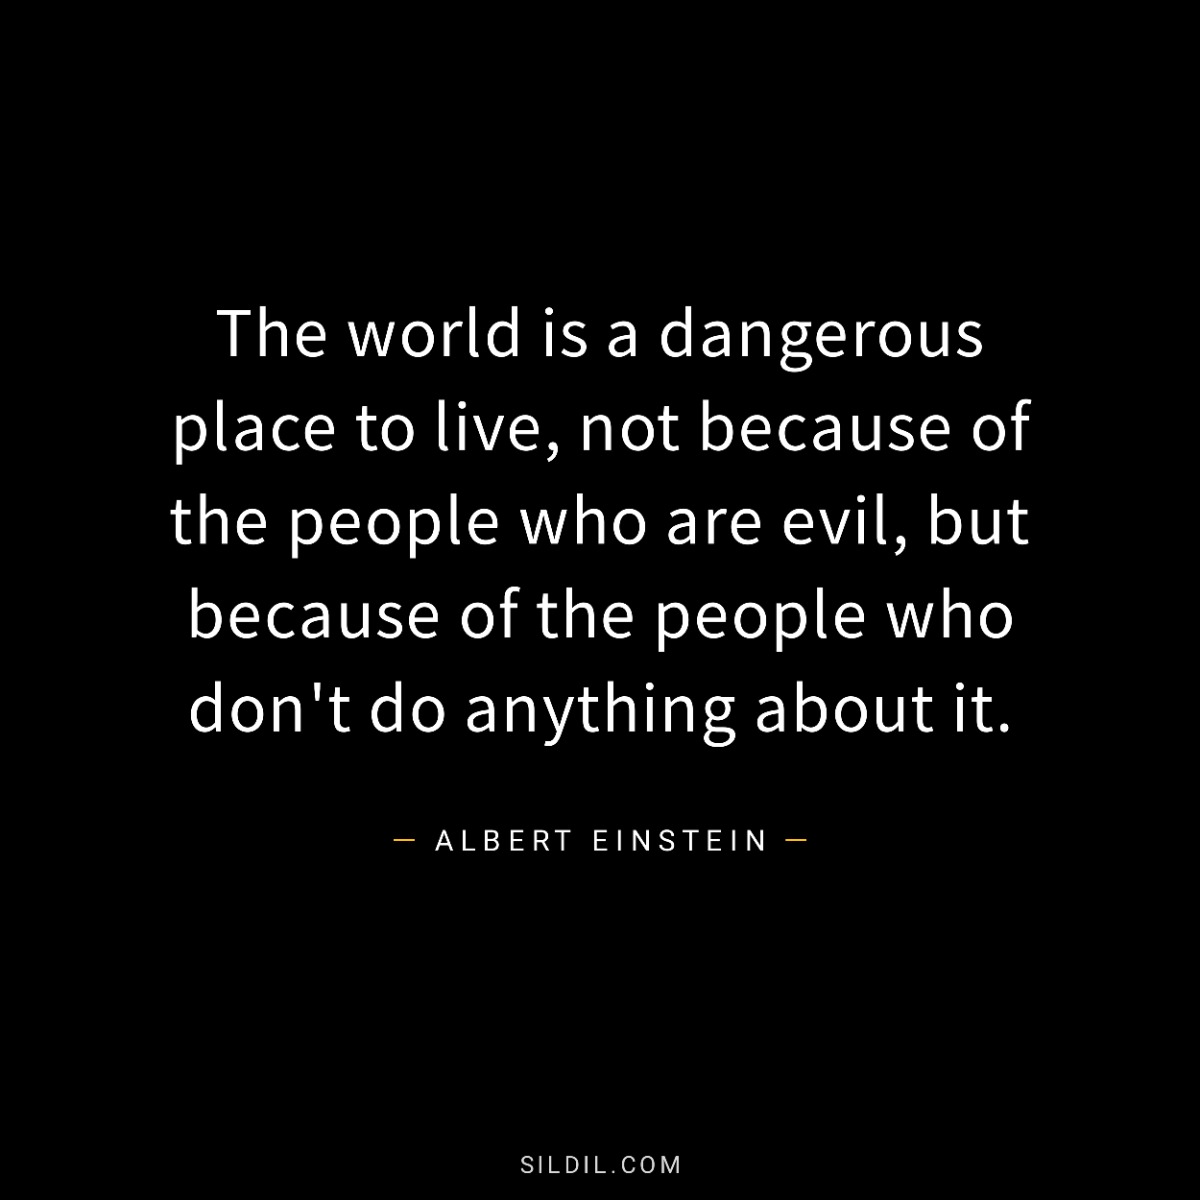 The world is a dangerous place to live, not because of the people who are evil, but because of the people who don't do anything about it.